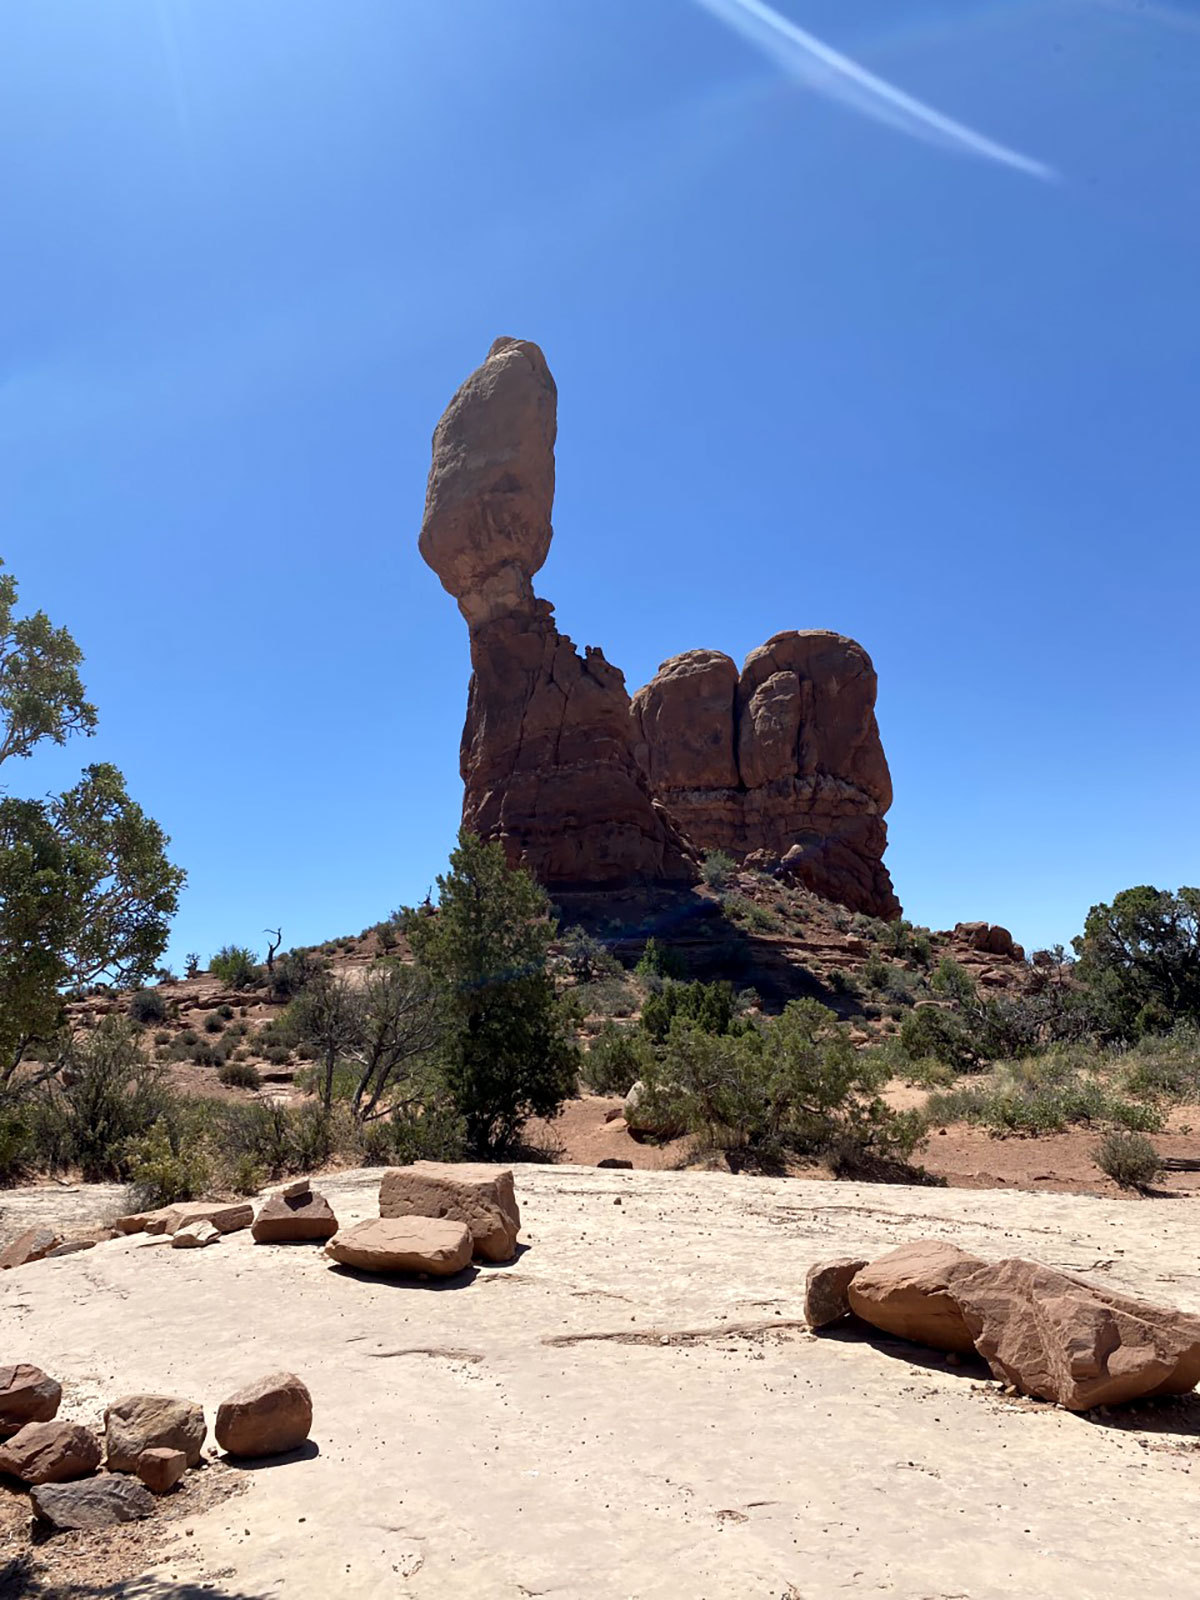 A rock formation known as Balancing Rock at Arches National Park.